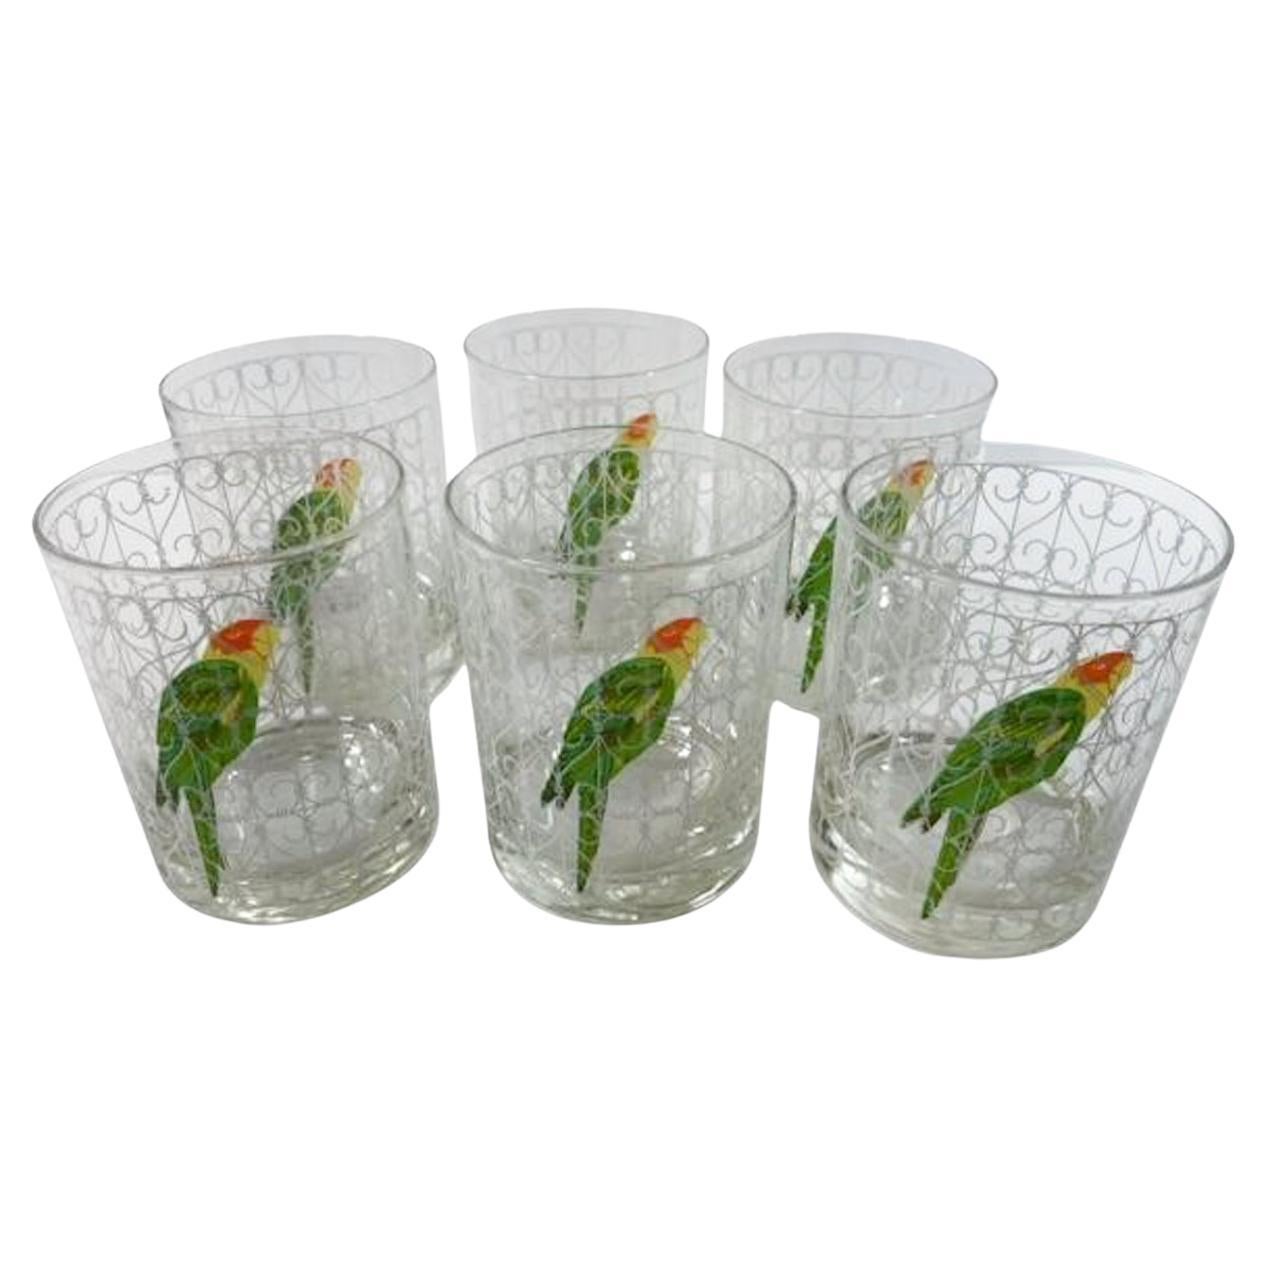 Six Vintage Rocks Glasses with a Parrot in a White Scrollwork Cage by Cera Glass For Sale